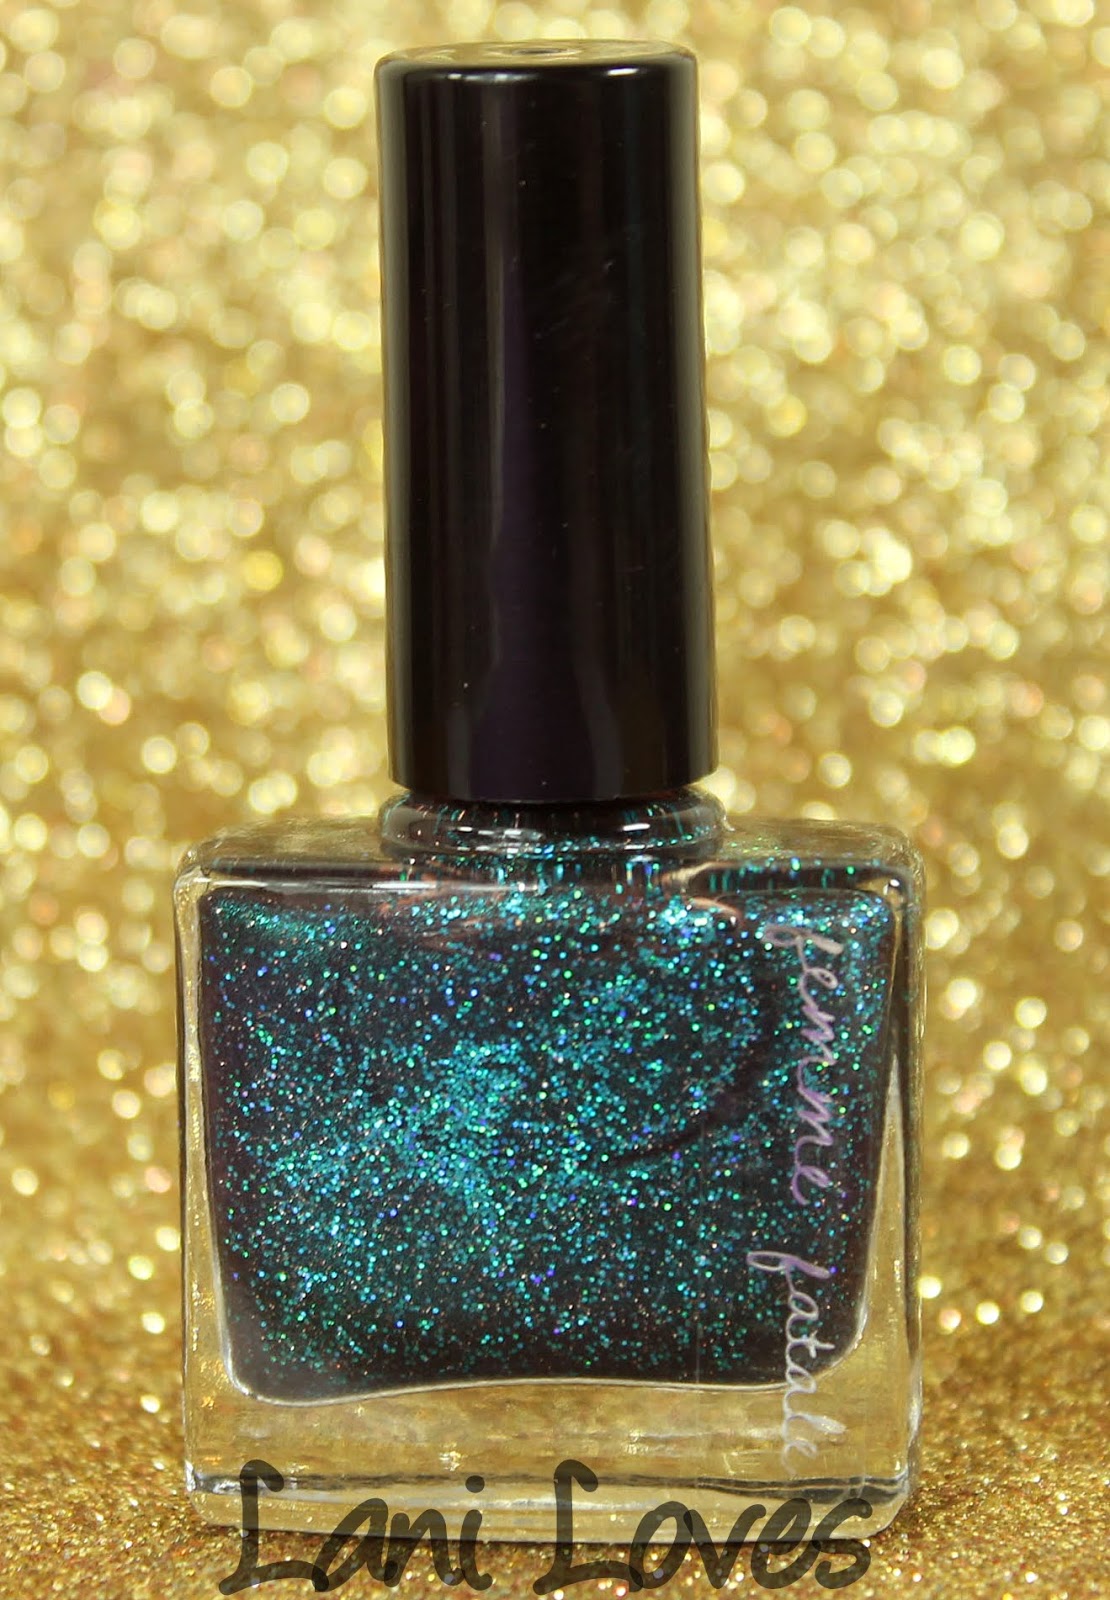 Femme Fatale Cosmetics In His House He Waits Dreaming nail polish swatches & review